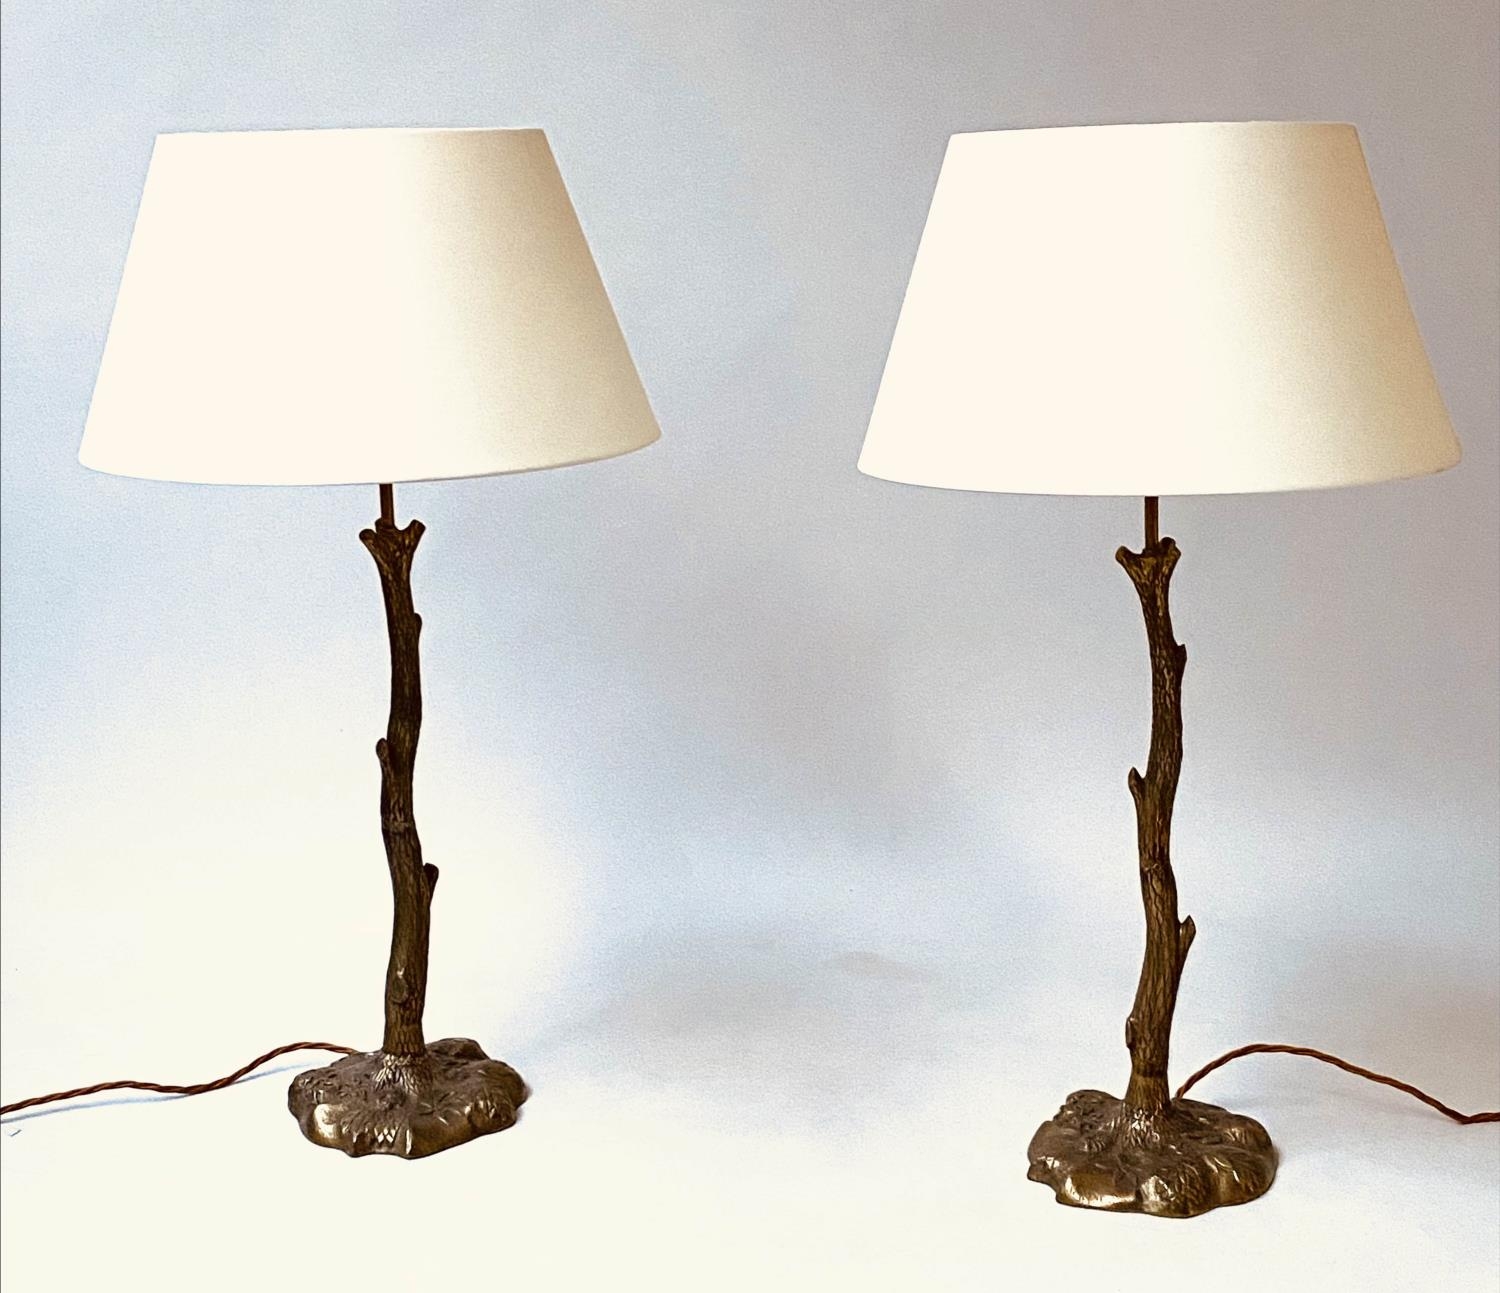 VAUGHAN TABLE LAMPS, a pair Truro twig table lamps in bronze with shades, 77cm H. (2) - Image 7 of 8